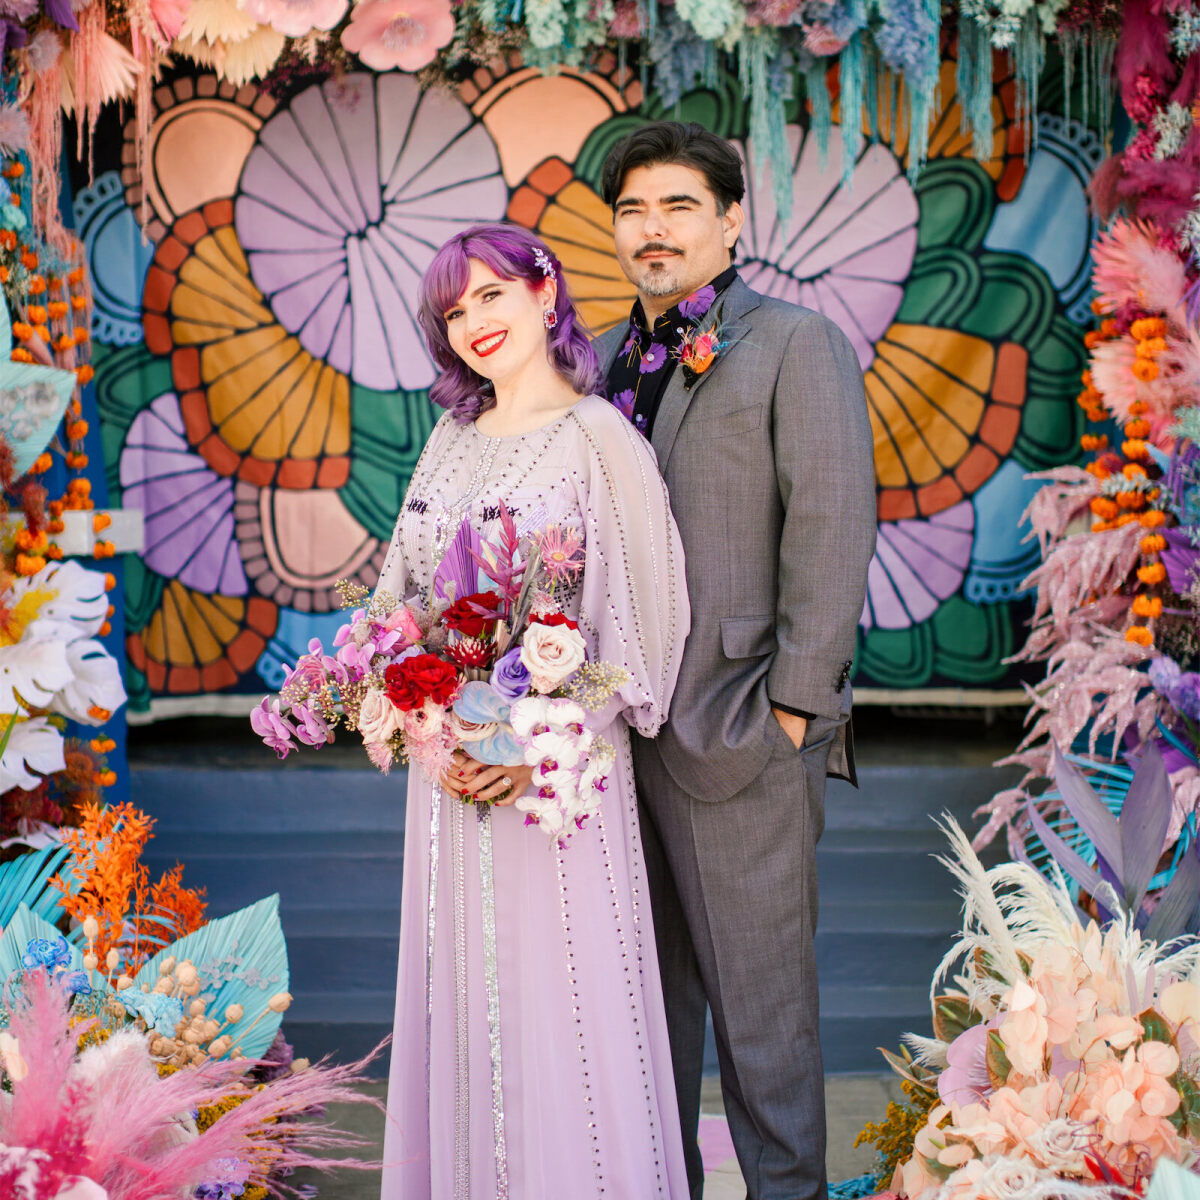 A bride and groom pause for a portrait at their vibrant outdoor wedding, which incorporated a rainbow floral installation and painted backdrop at their ceremony.